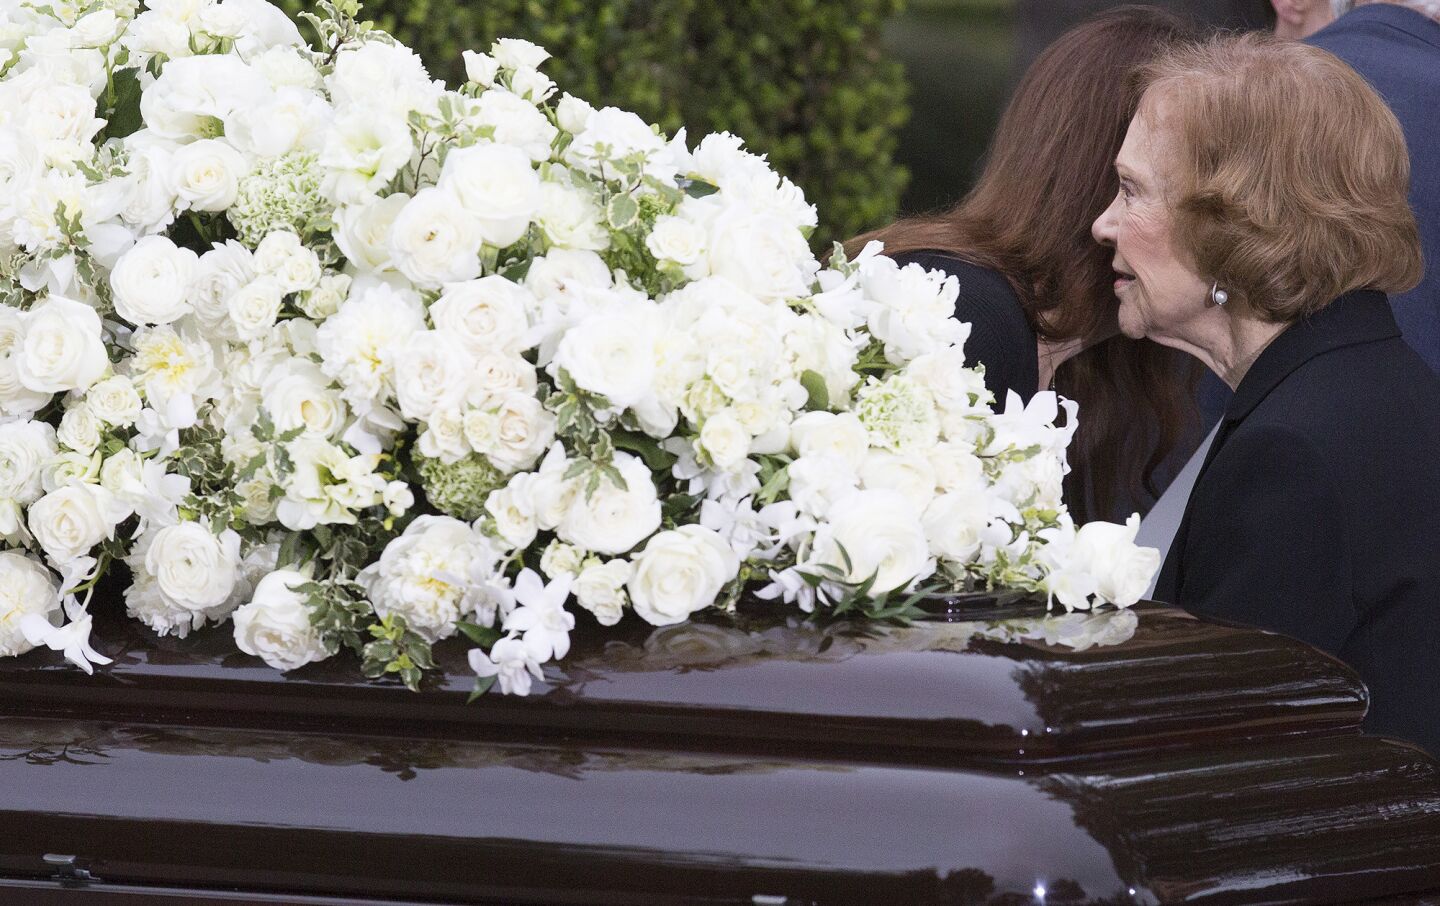 Former First Lady Rosalynn Carter pauses at Nancy Reagan's casket at the Ronald Reagan Presidential Library in Simi Valley.